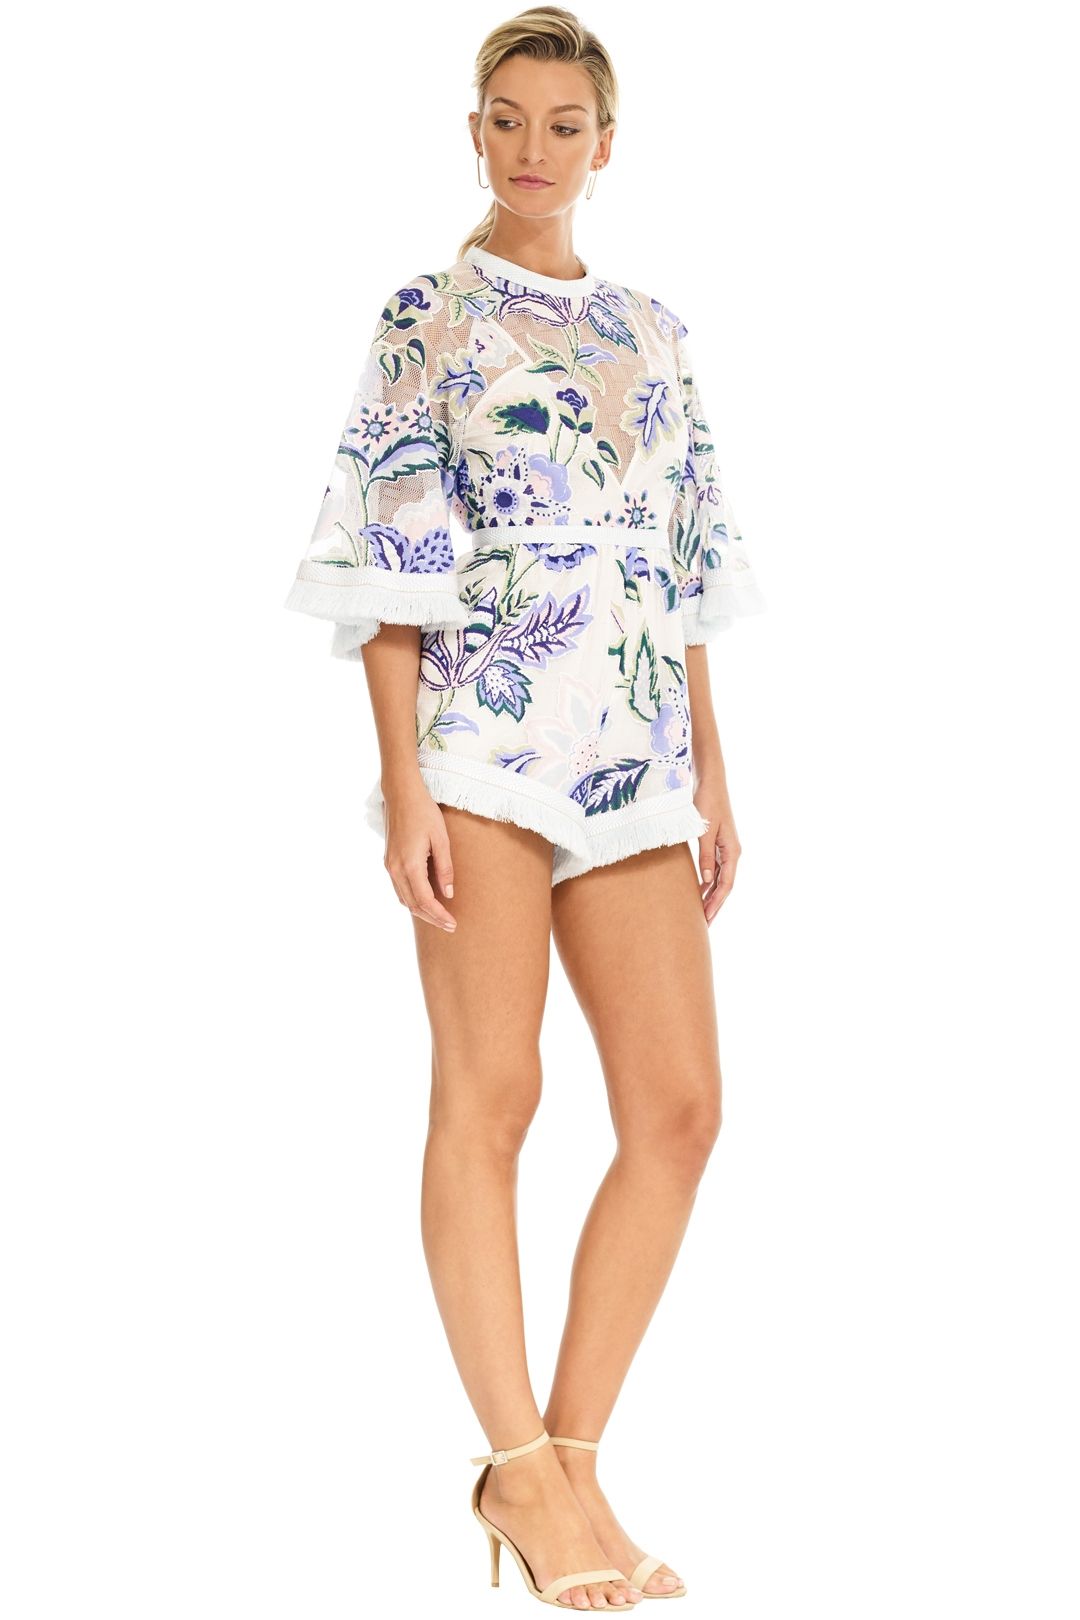 Alice McCall - Georgie Boy Playsuit - White Thistle - Side